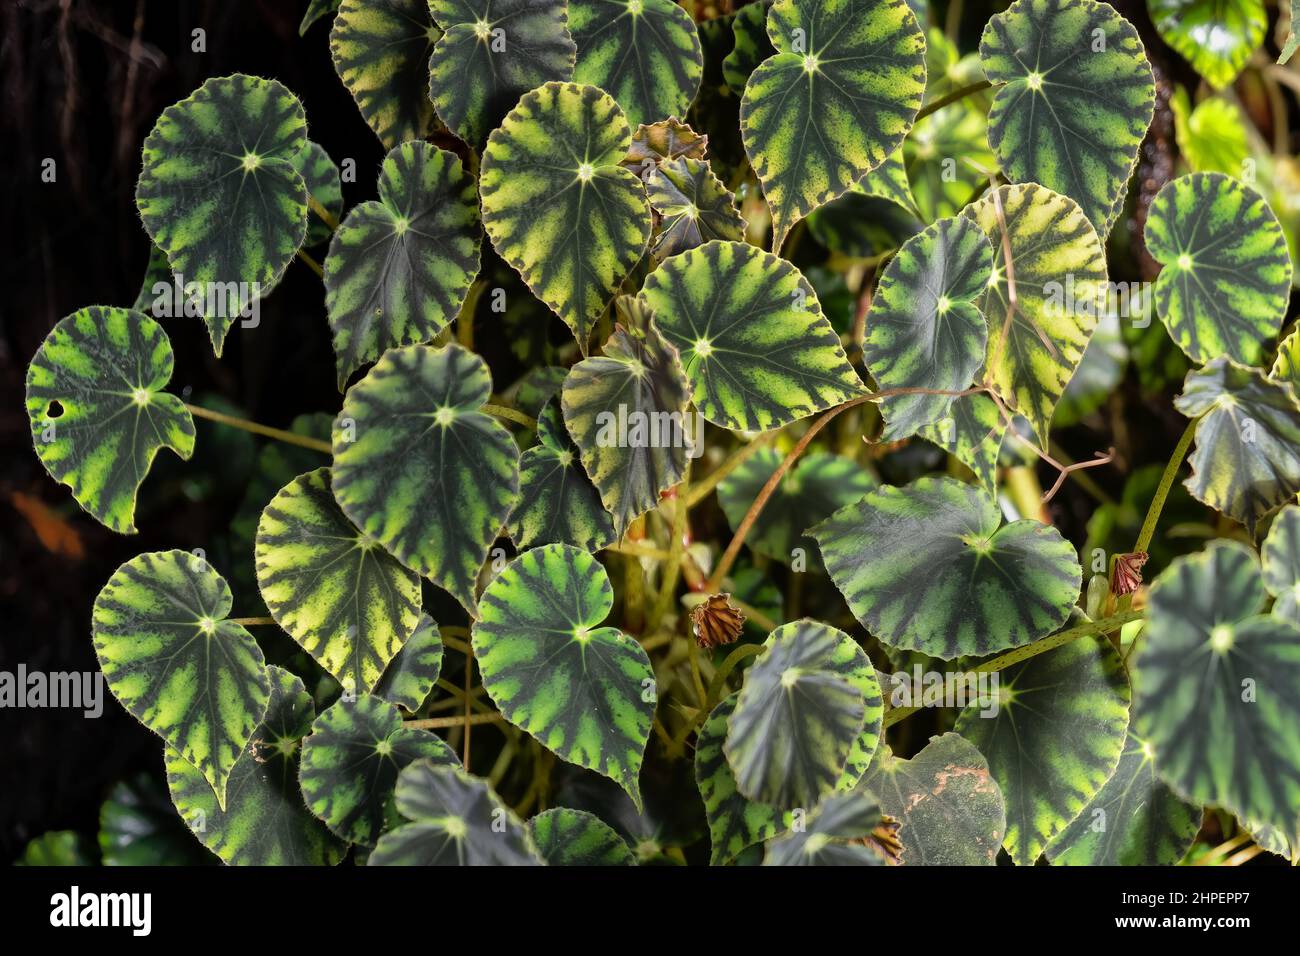 Begonia mazae f nigricans plant foliage, family: Begoniaceae, native to tropical forests of Mexico. Stock Photo